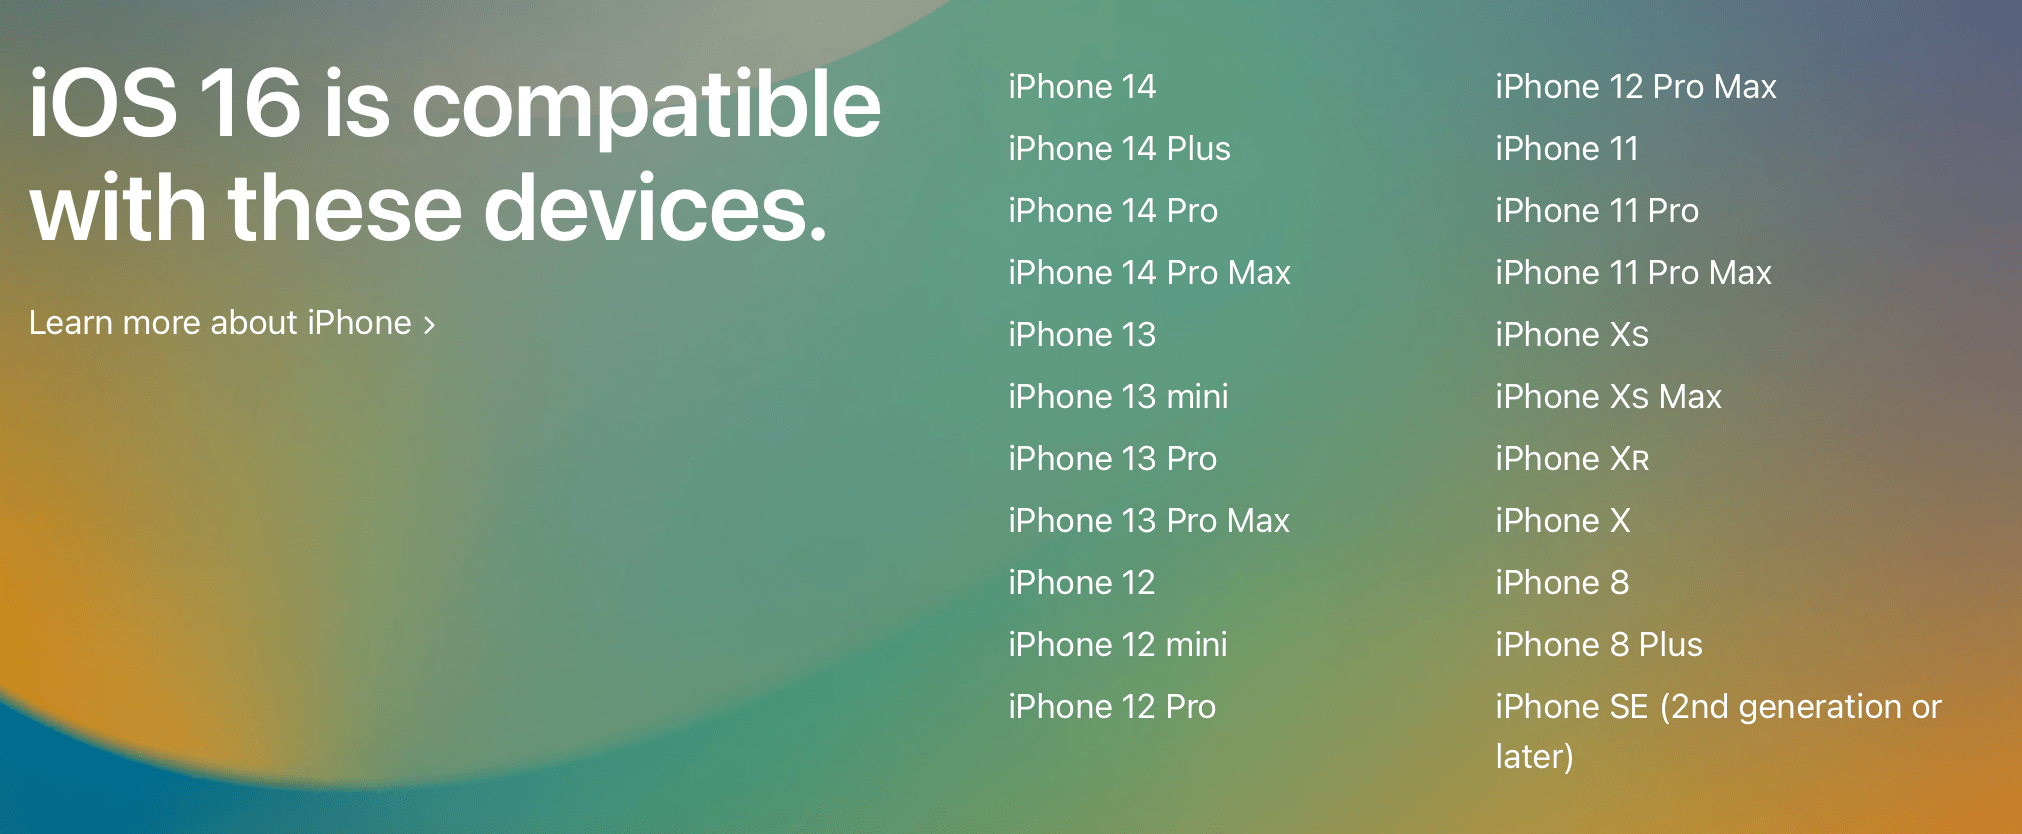 iPhone models compatible with iOS 16.